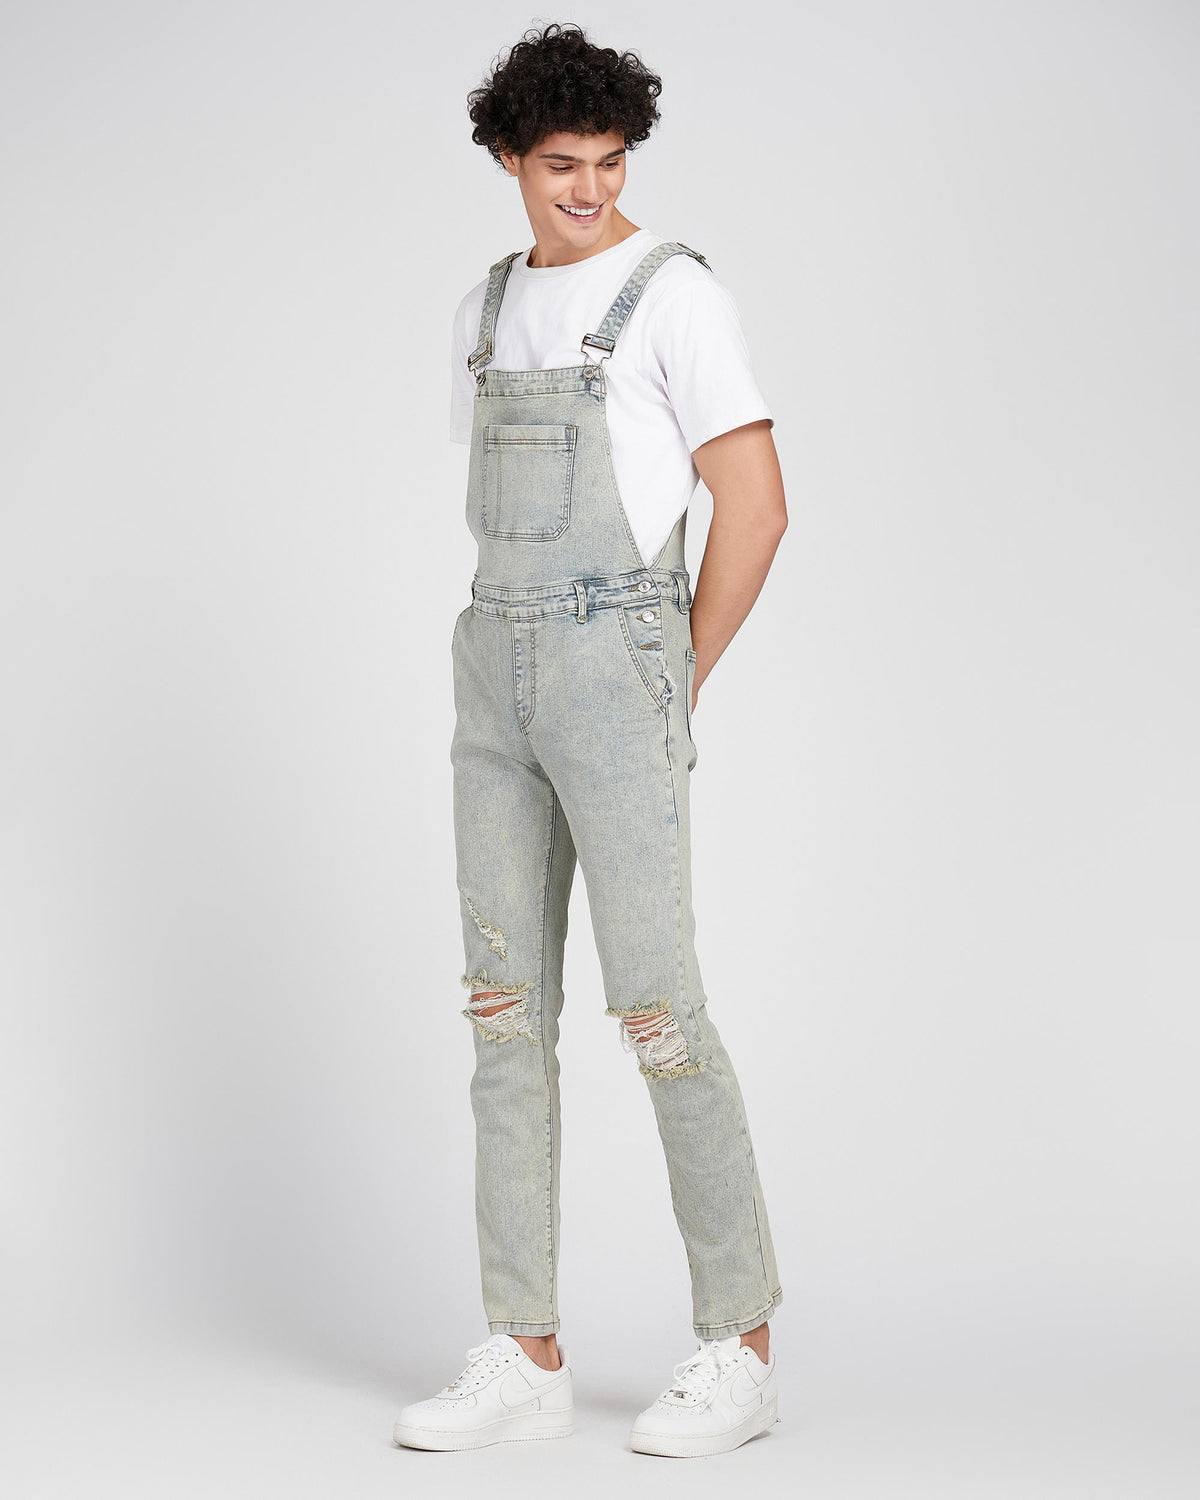 Classic Ripped & Distressed Denim Overalls